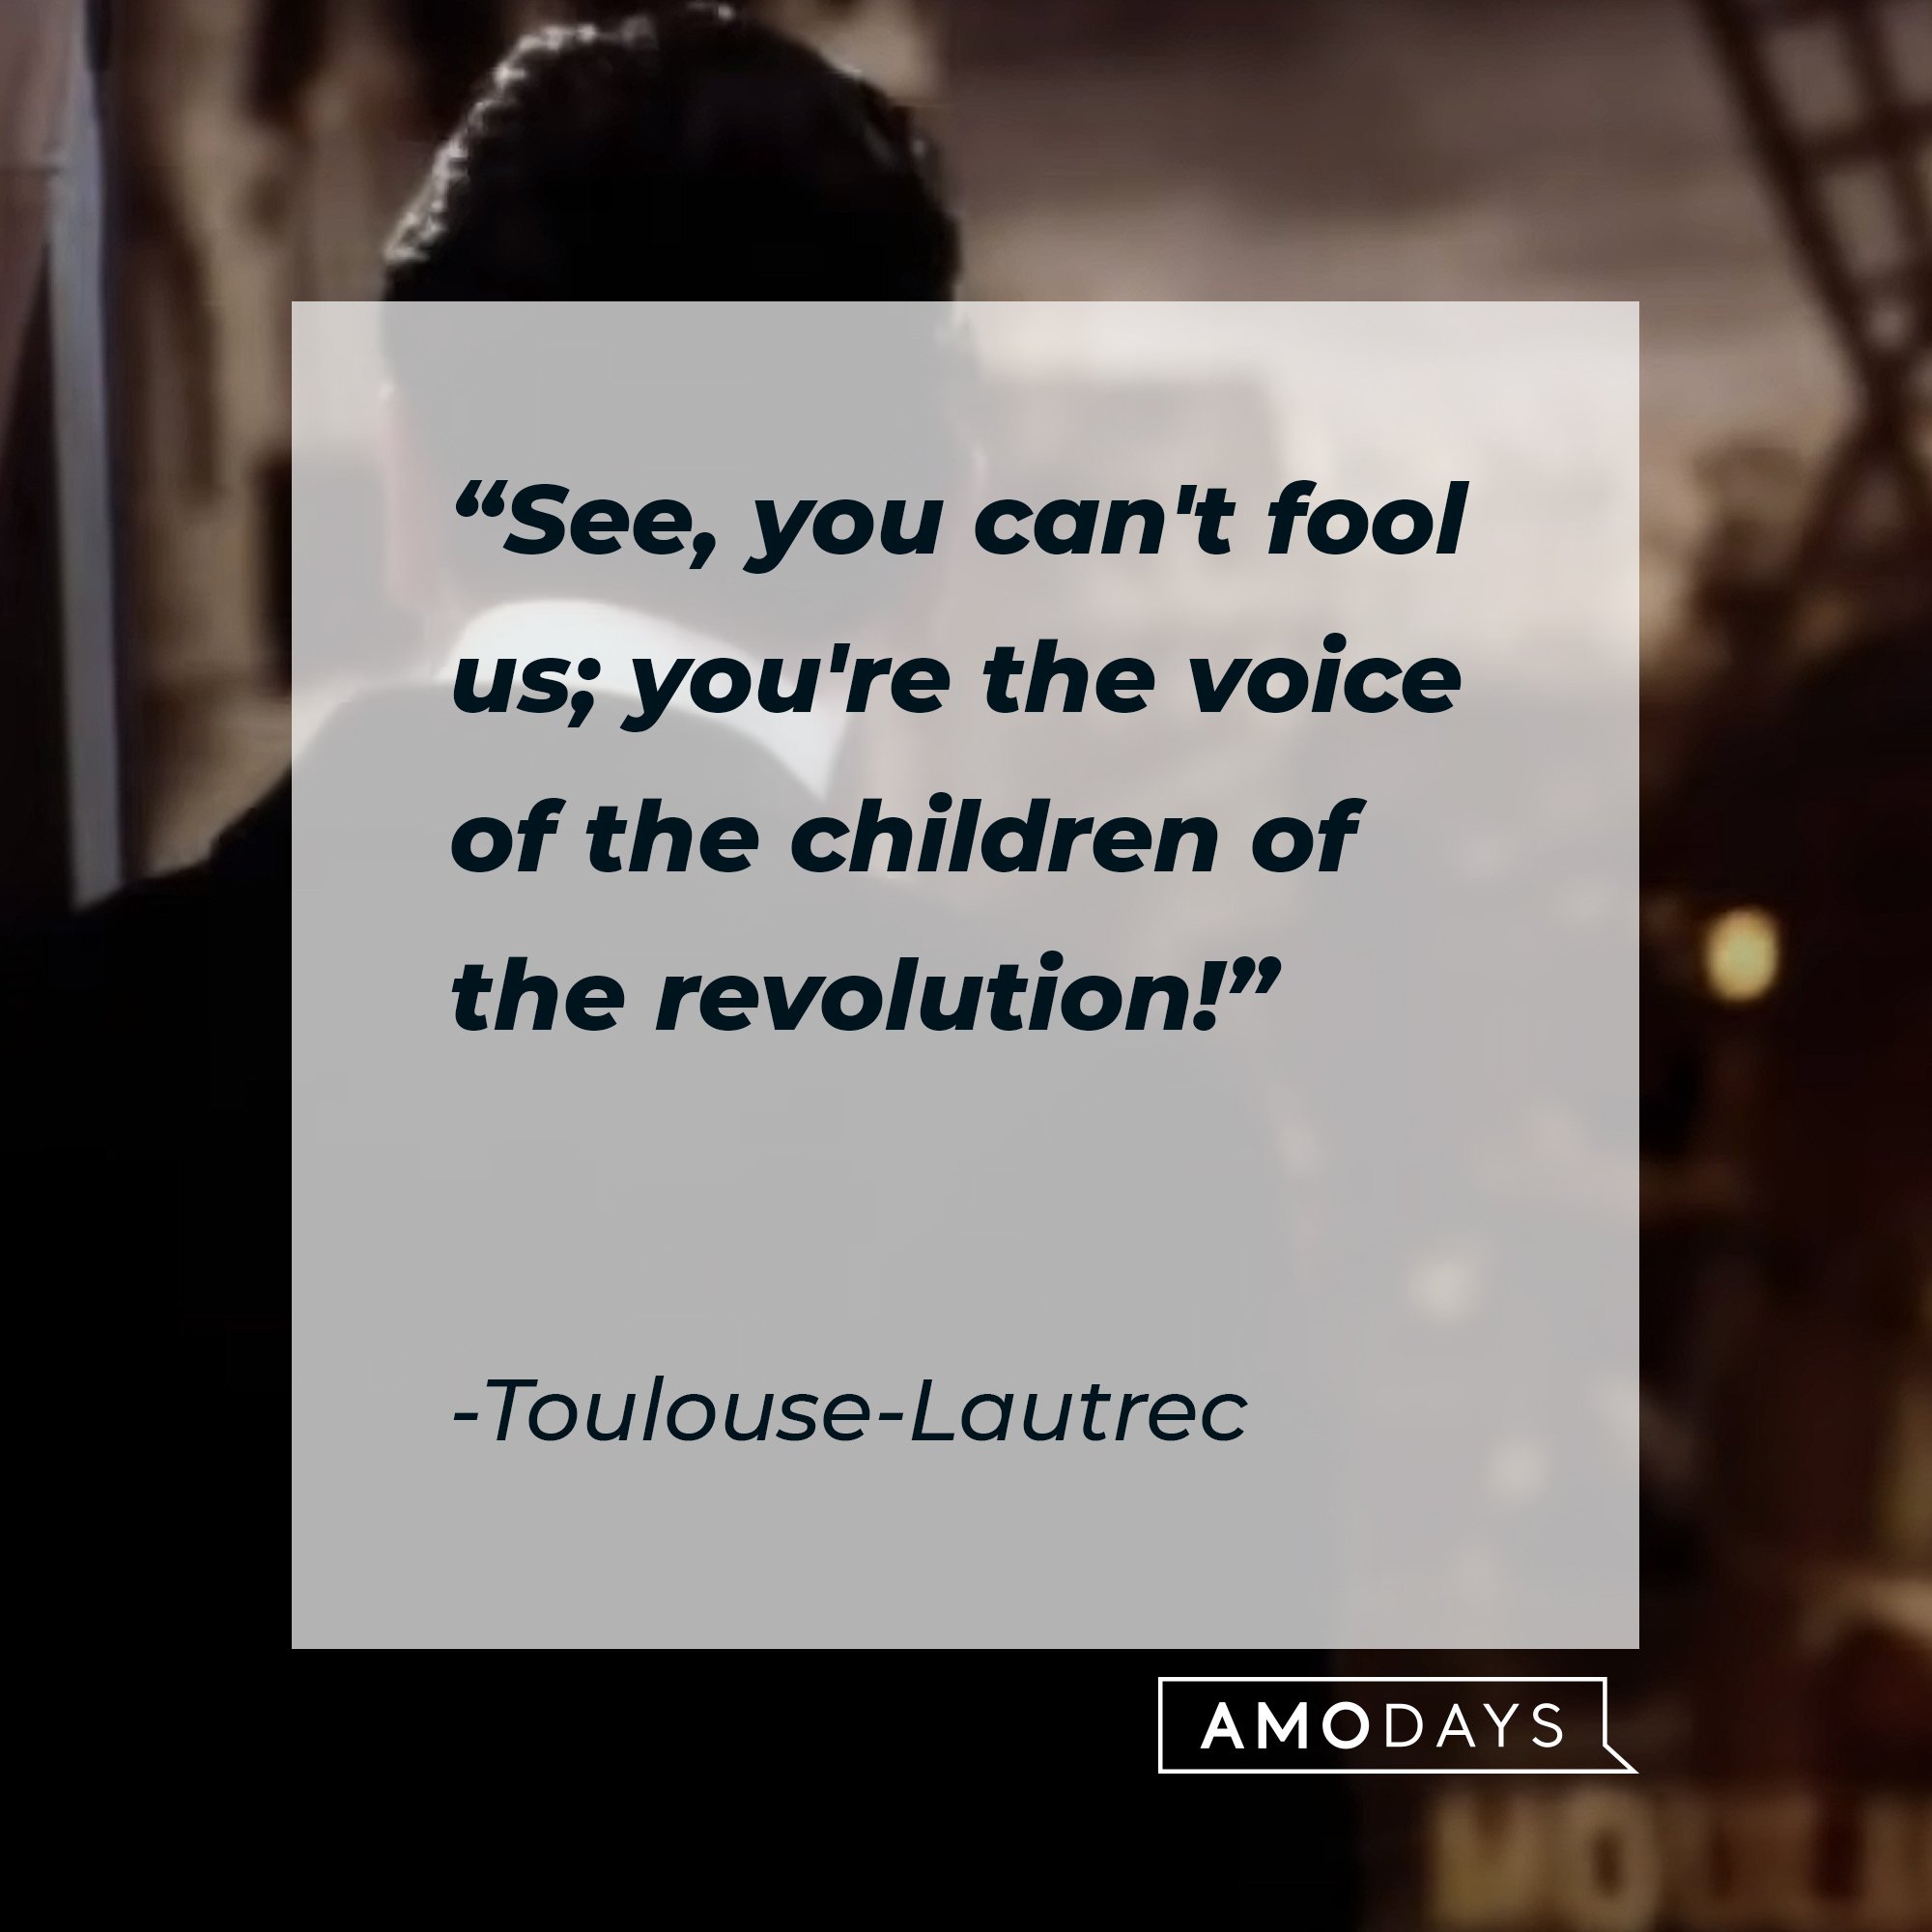  Toulouse-Lautrec's quote: "See, you can't fool us; you're the voice of the children of the revolution!" | Image: AmoDays